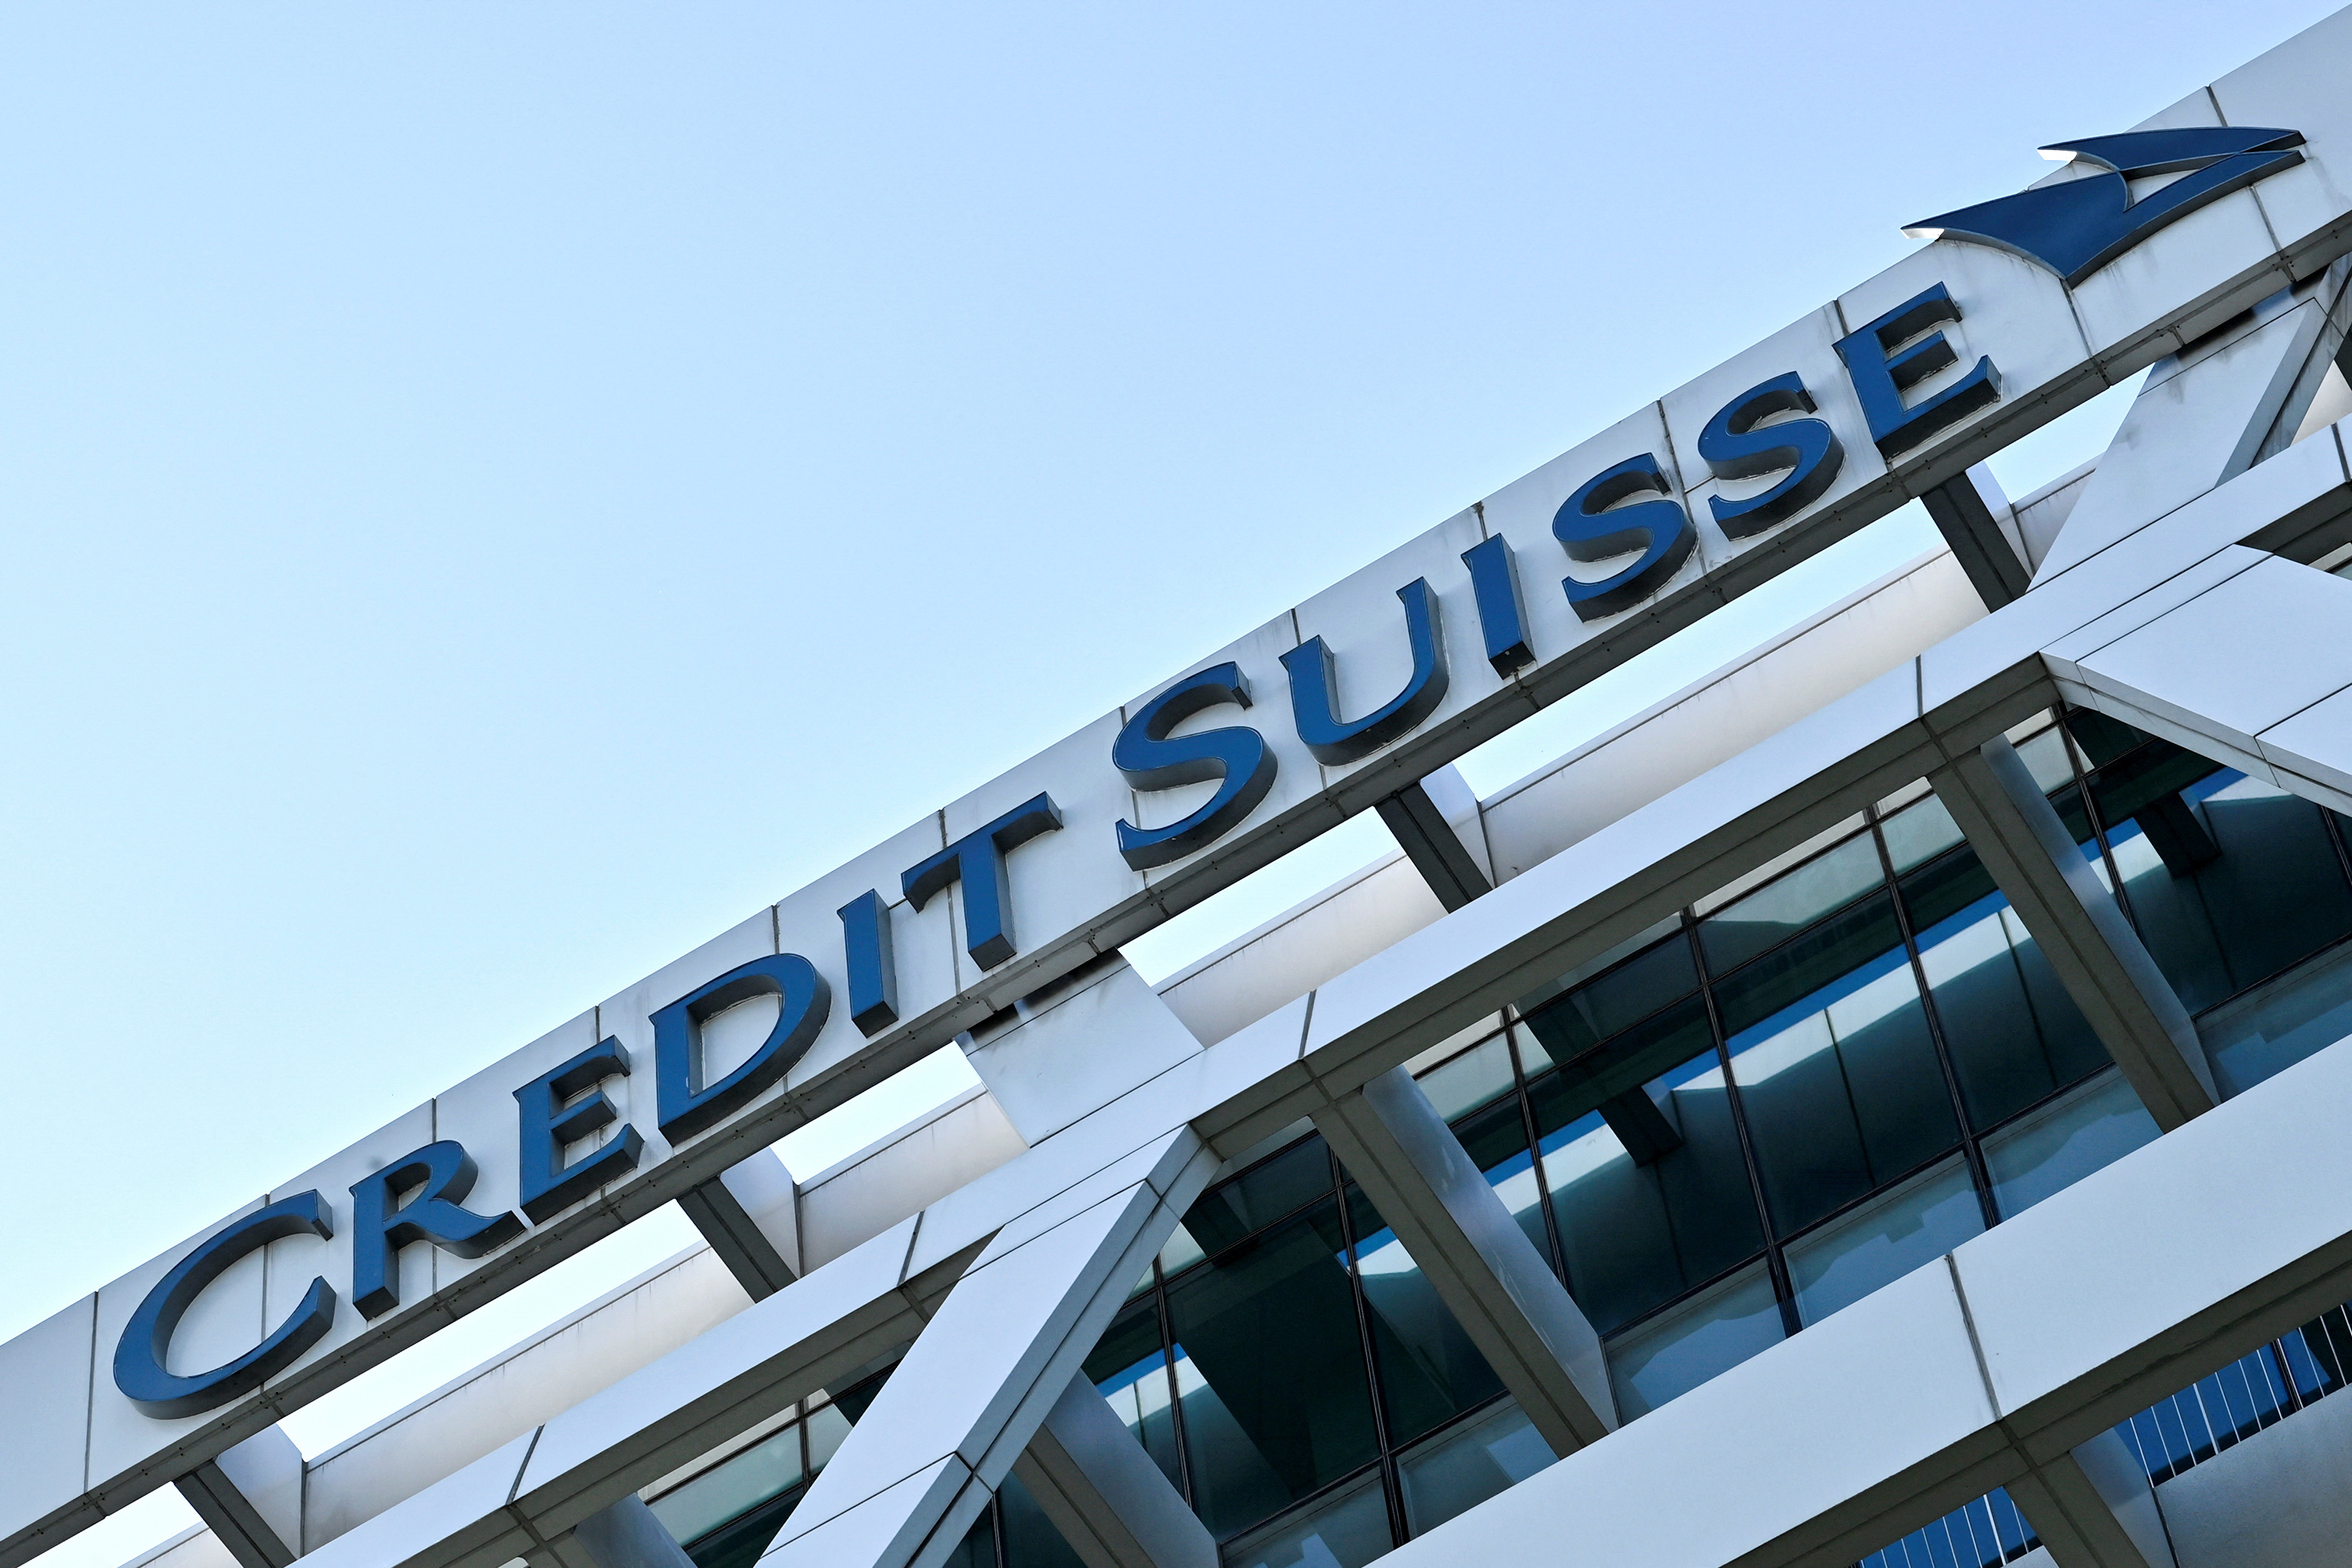 A view of the Credit Suisse logo on a building in Singapore